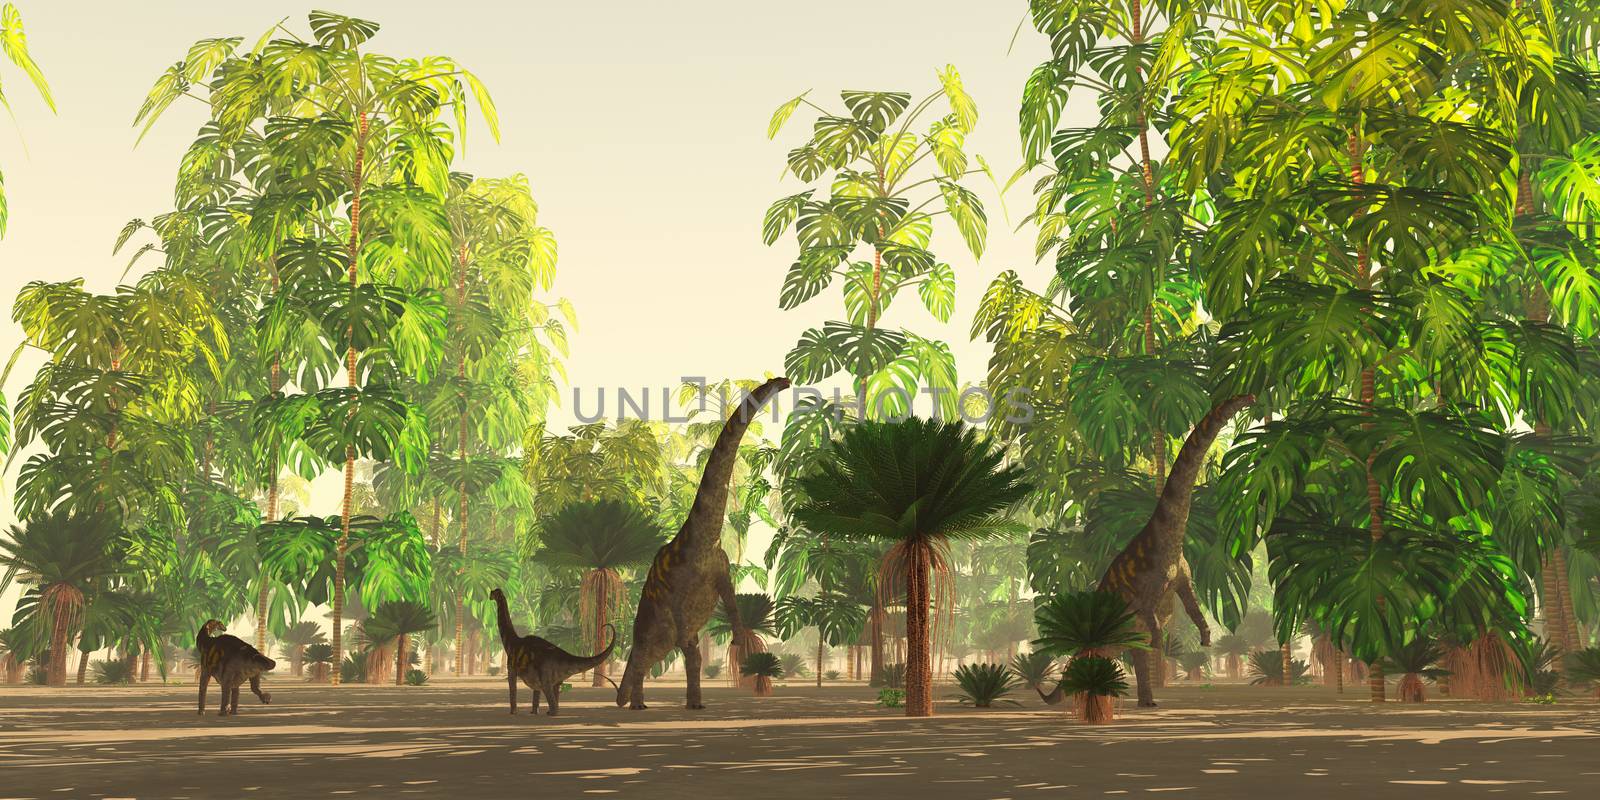 A Cycad and Monstera deliciosa forest in the Cretaceous Period provides forage for a herd of Argentinosaurus dinosaurs.